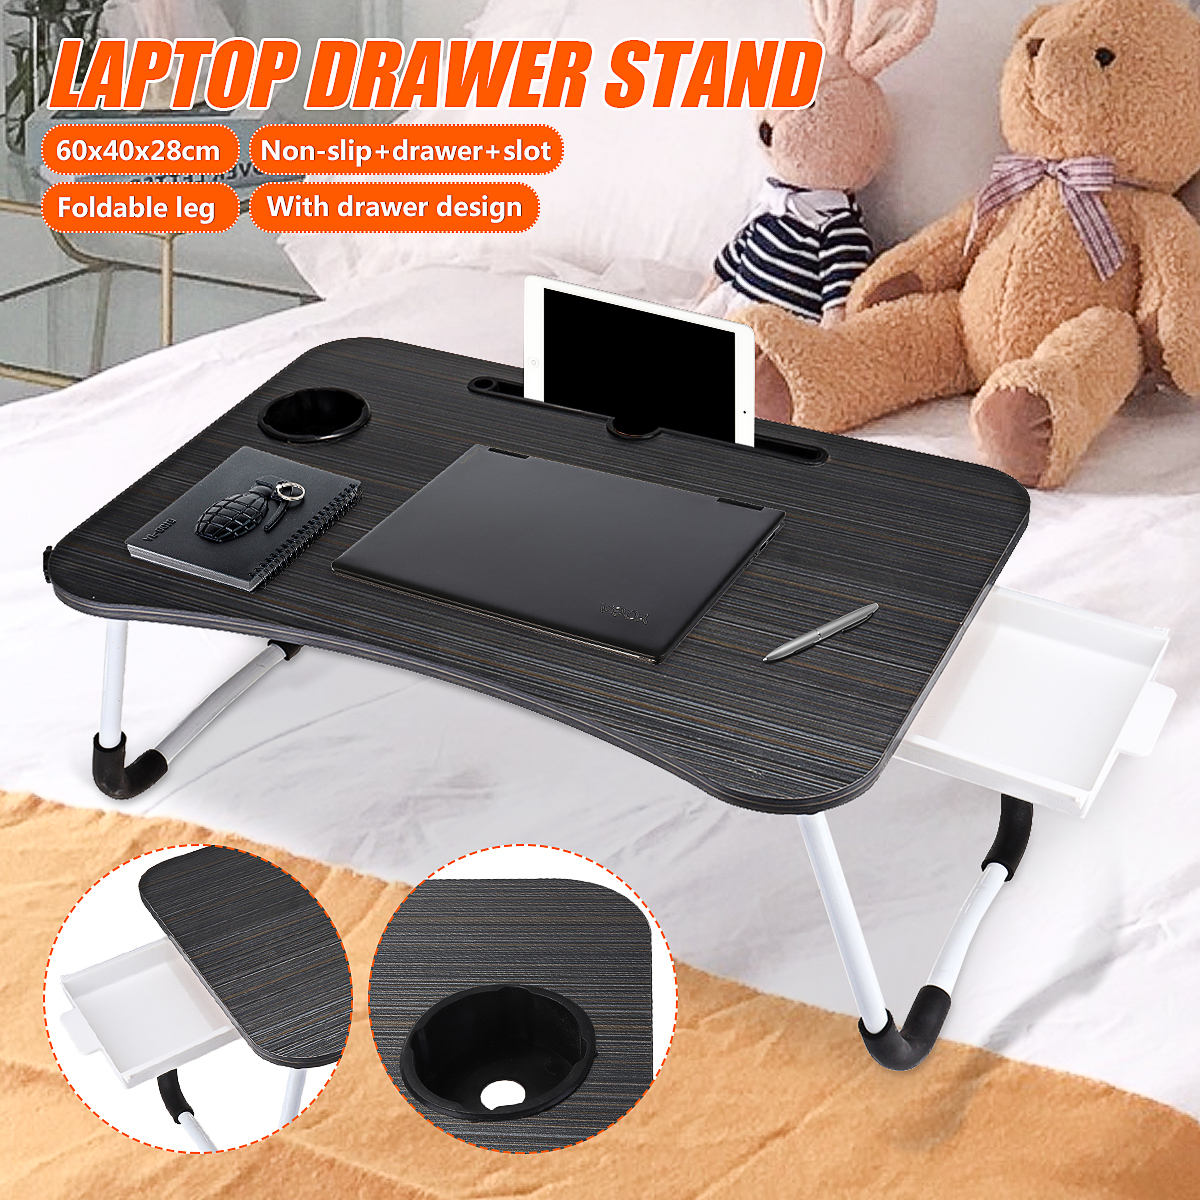 Laptop-Table-Stand-with-Small-Drawer-Portable-Folding-Desk-Notebook-Table-Stand-Lap-Tray-Bed-for-Chi-1728170-3